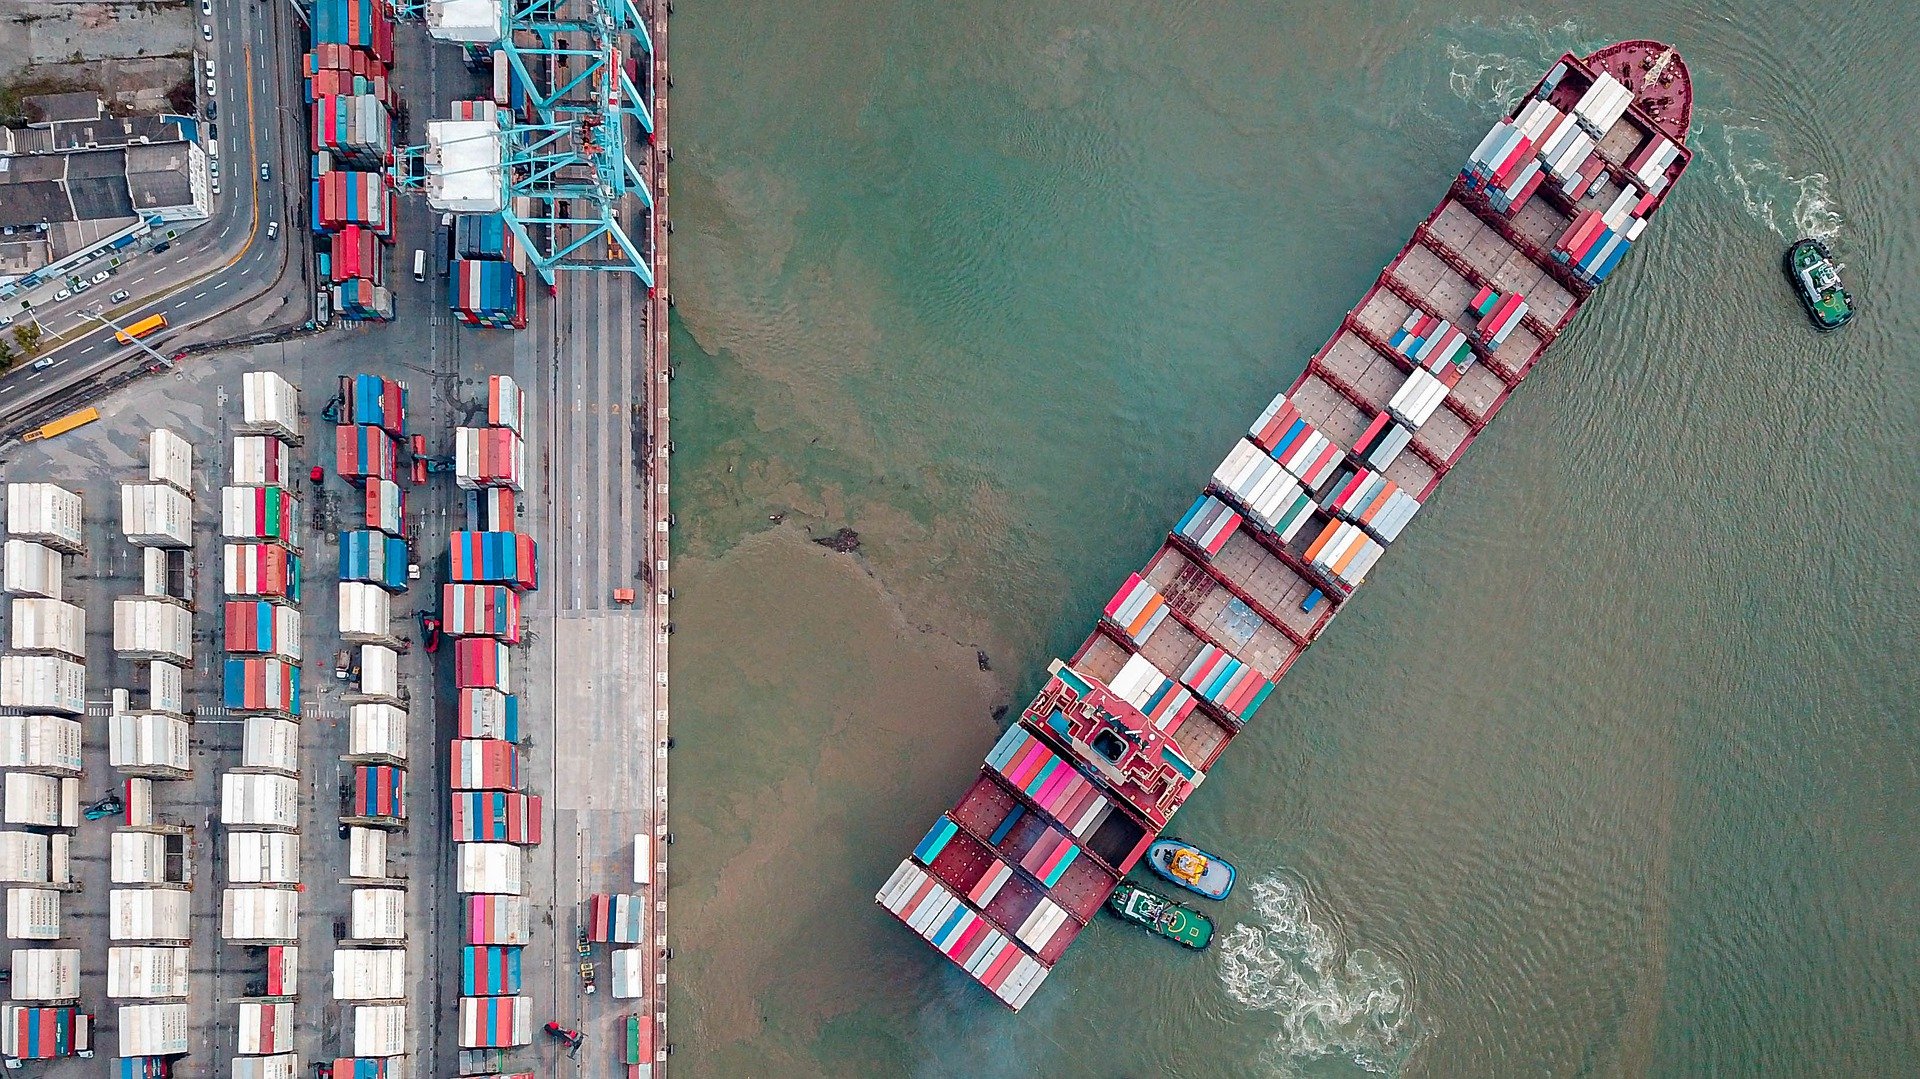 A ship loaded with containers in a port